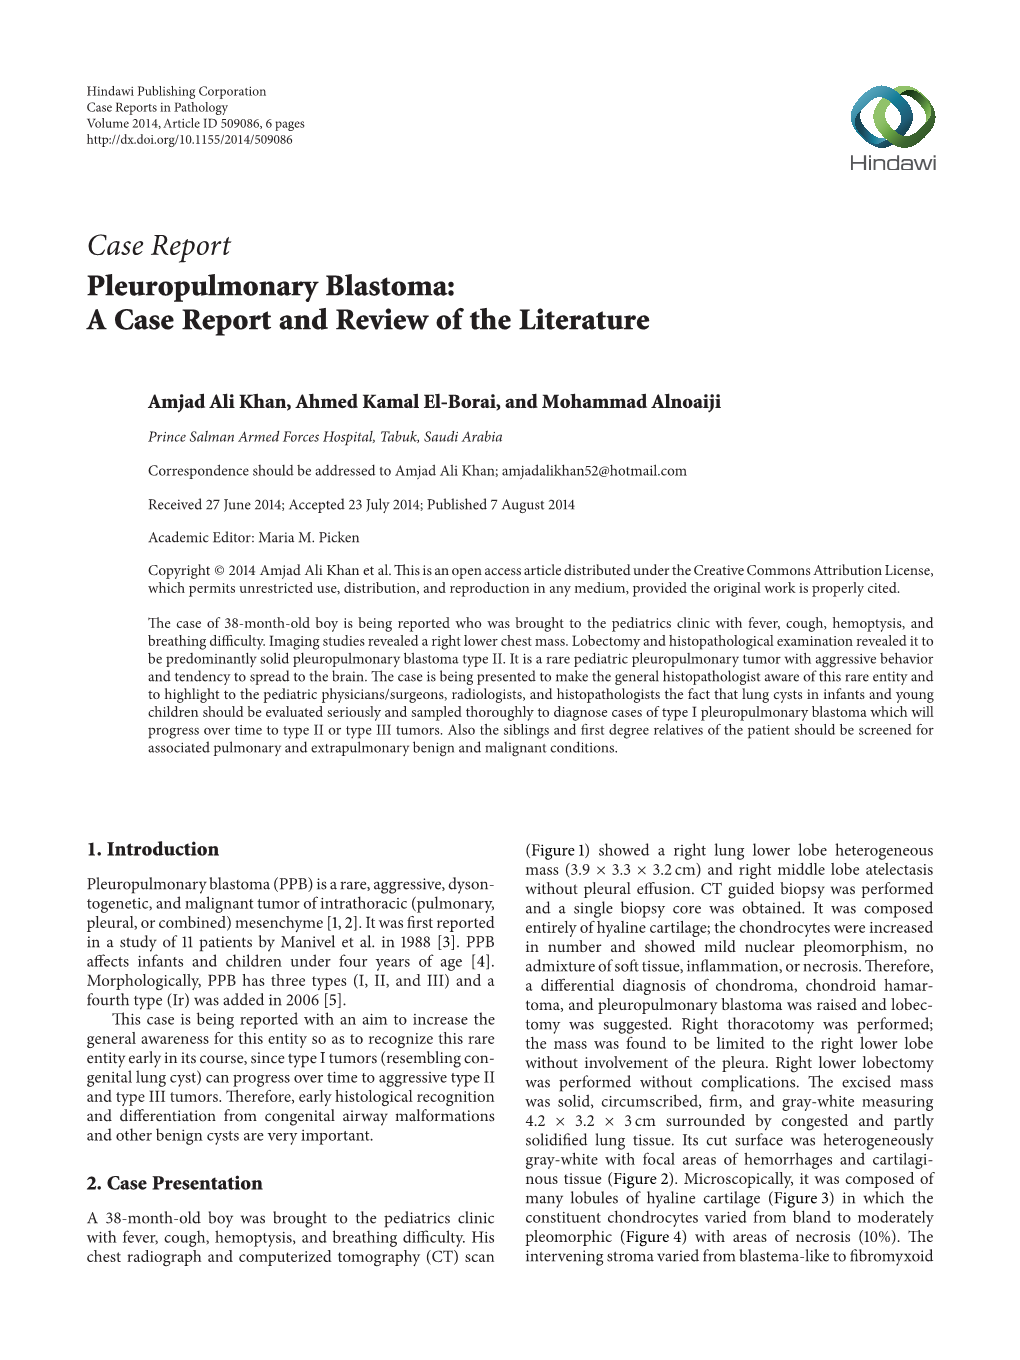 Pleuropulmonary Blastoma: a Case Report and Review of the Literature